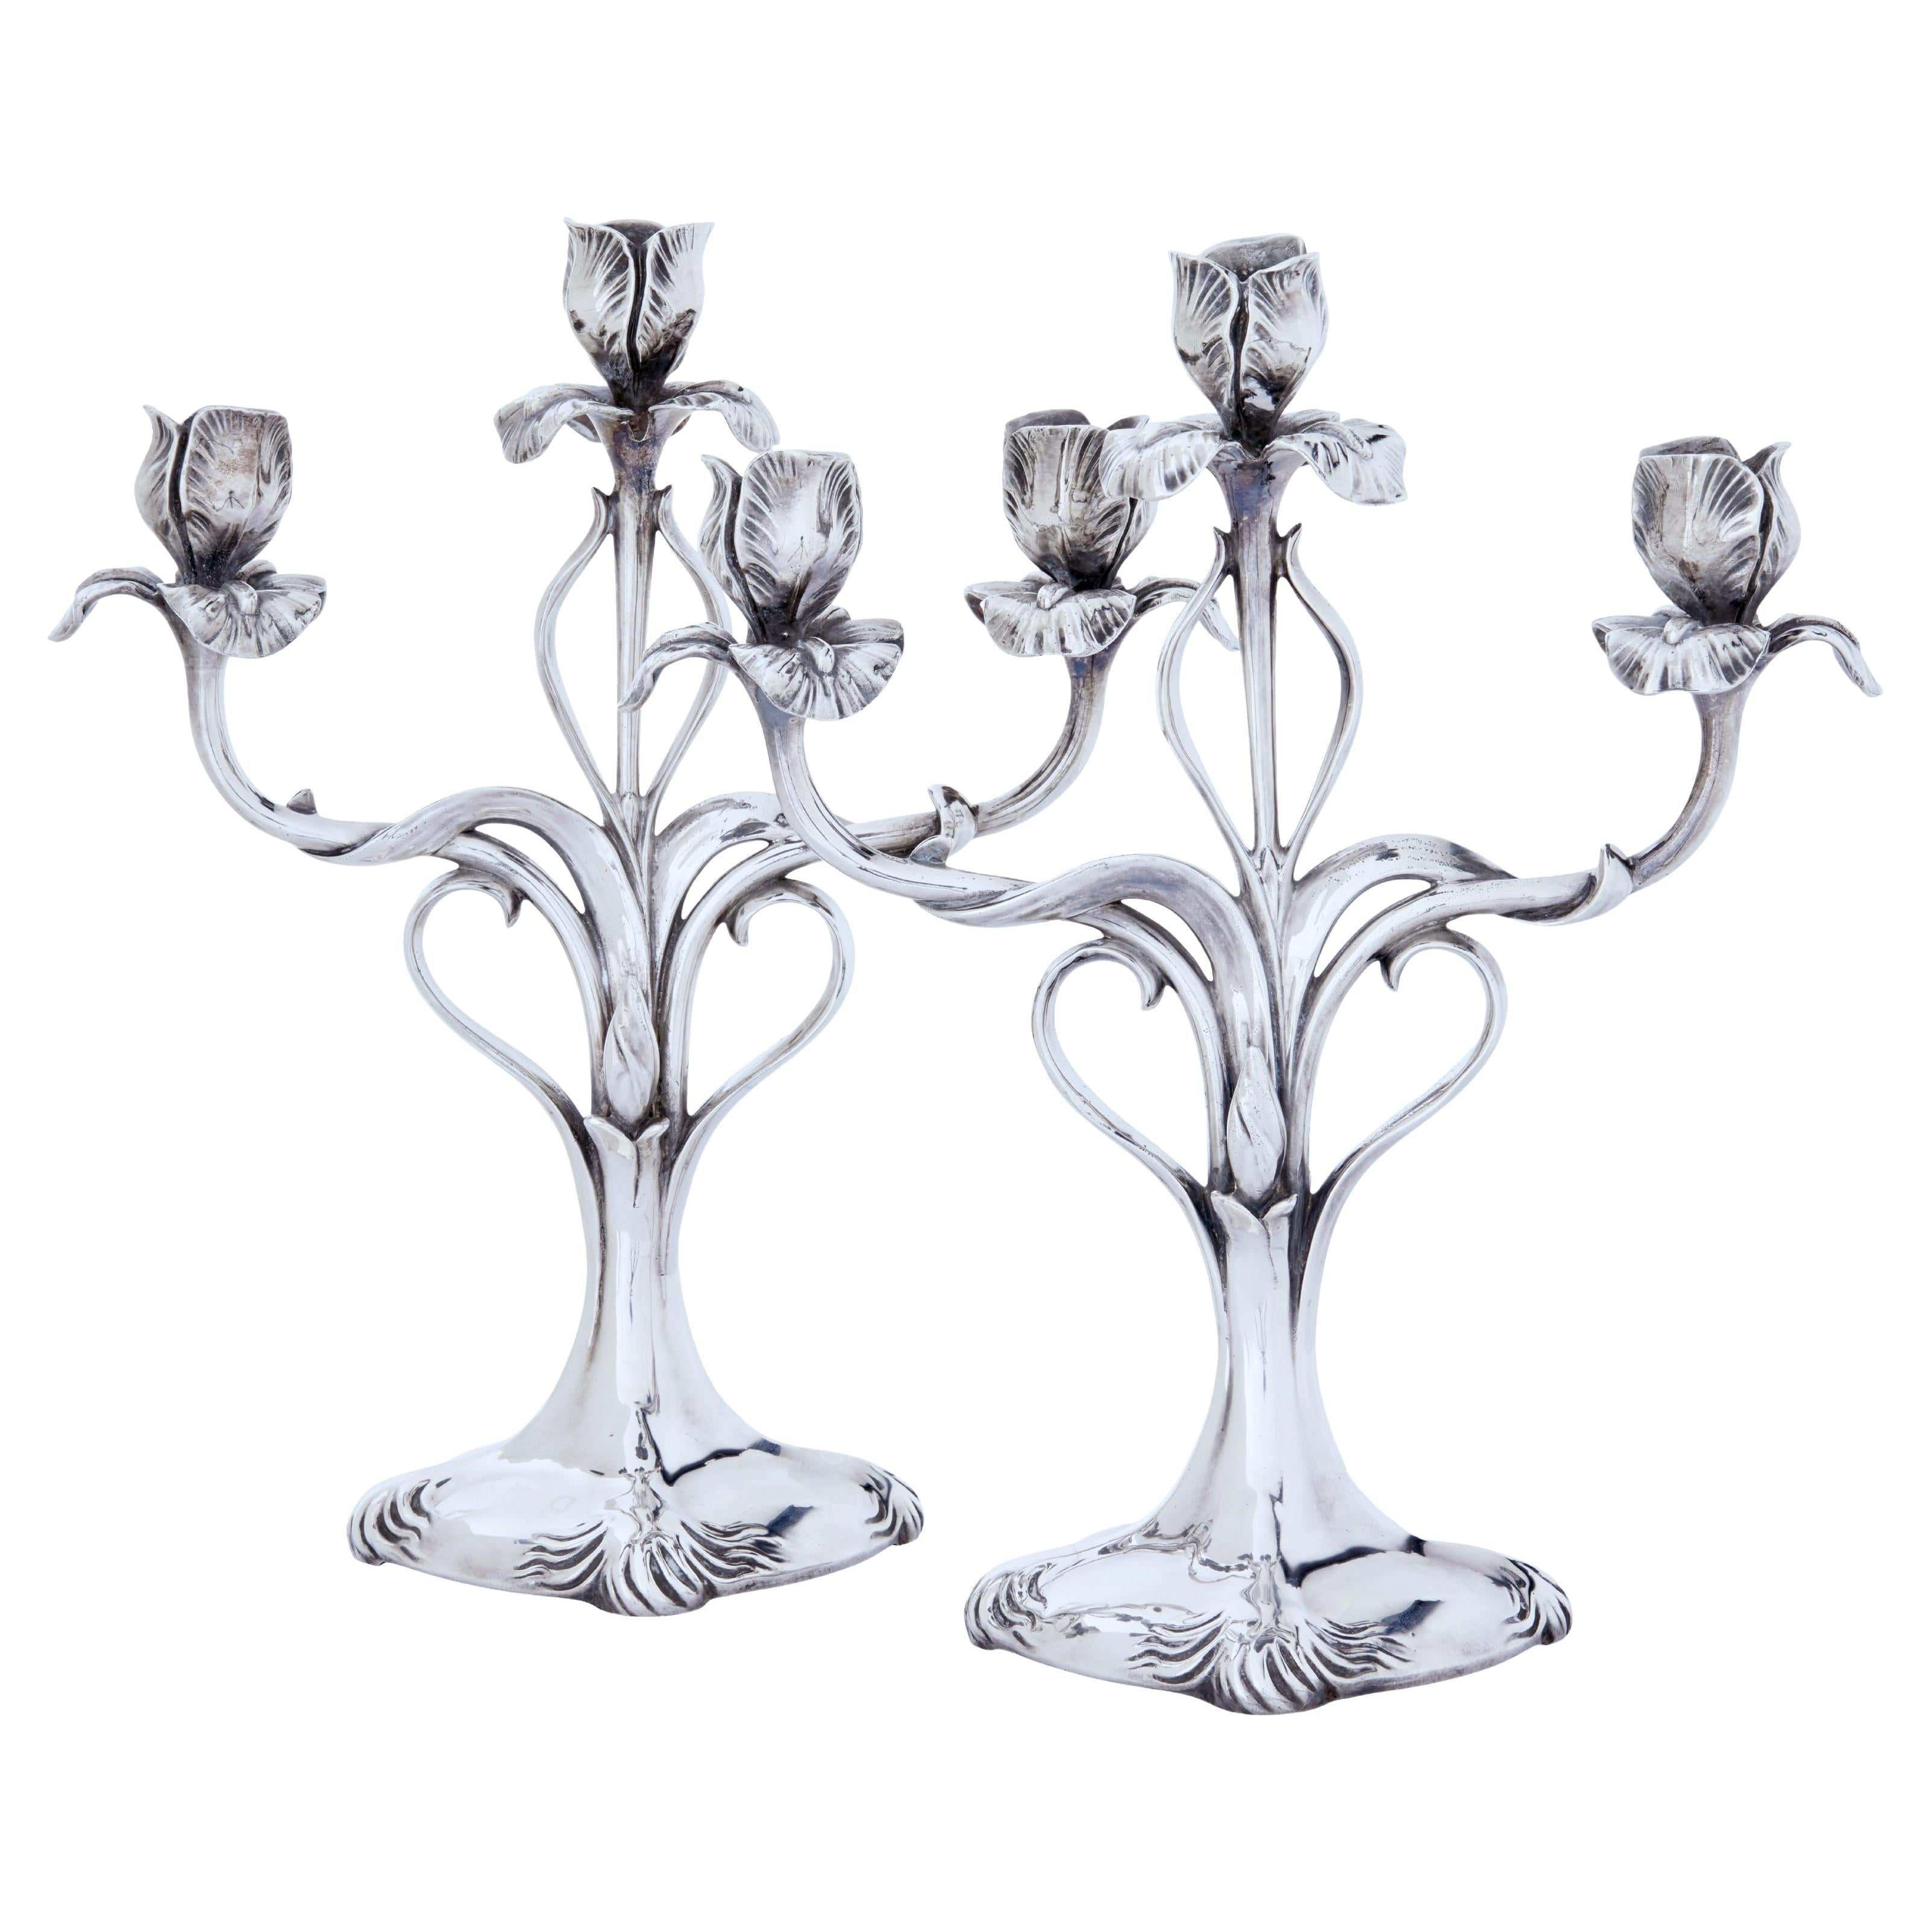 Christofle Christofle Silver Plated Candelabra Twin Branch Candlestick Candle Holder 